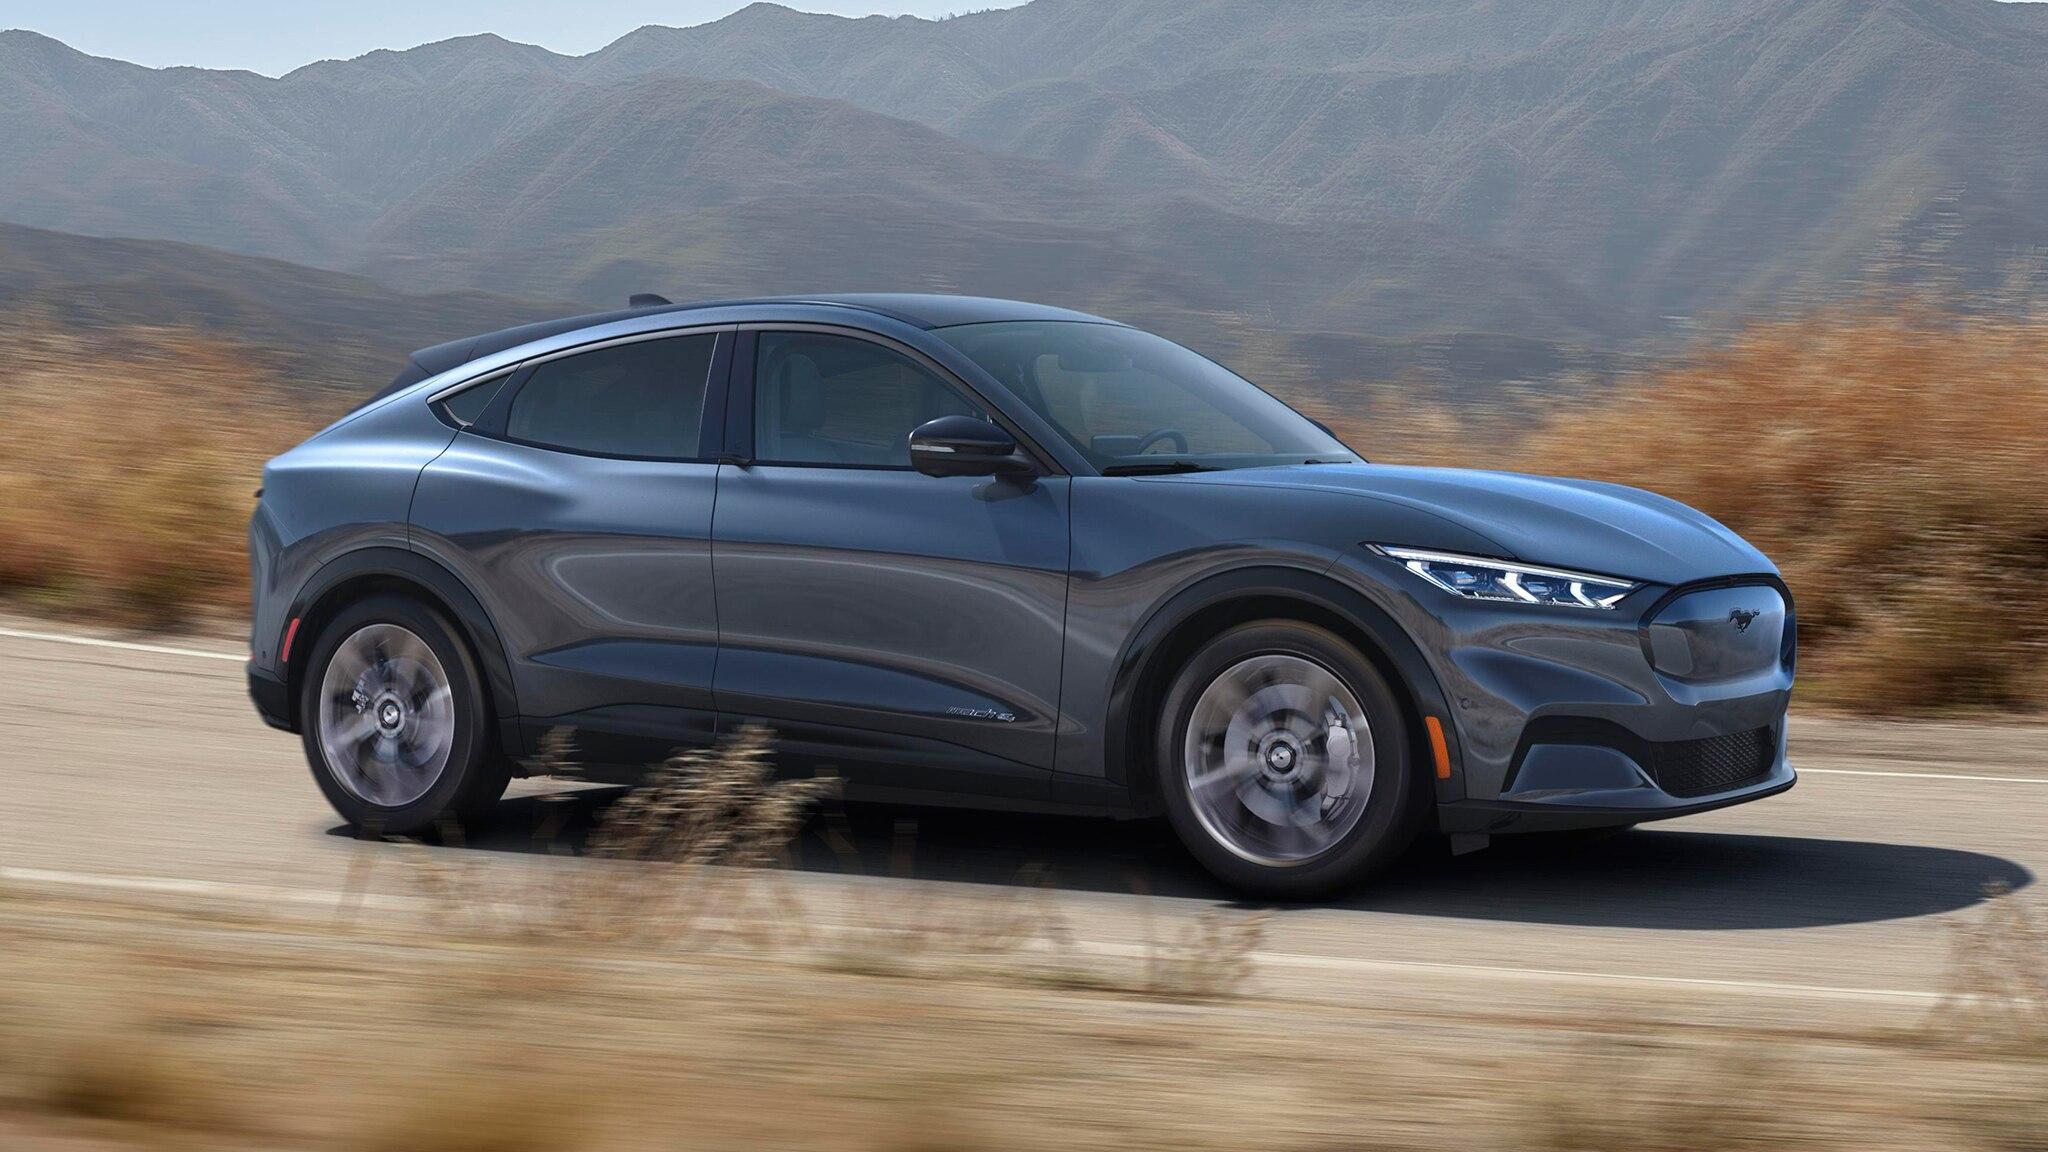 Ford Mustang Mach E: How The Electric SUV Became A